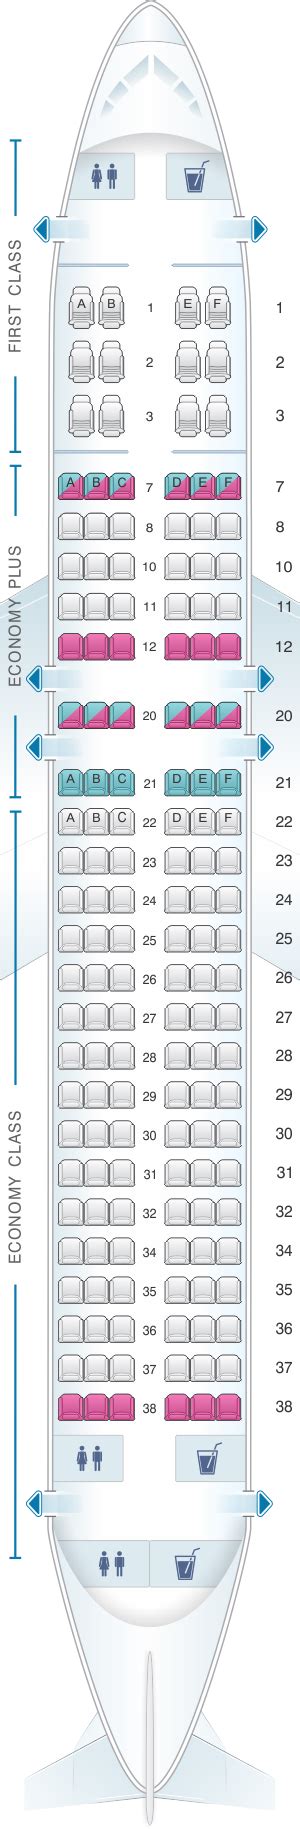 Airbus a320 seat map united. United Seat Maps Boeing 737-900 (739) Layout 1 Overview Planes & Seat Maps Airbus A319 (319) Layout 1 Airbus A319 (319) Layout 2 Airbus A320 (320) Boeing 737 MAX 9 (7M9) Boeing 737-700 (737) Domestic Layout 1 Boeing 737-700 (737) Domestic ... 